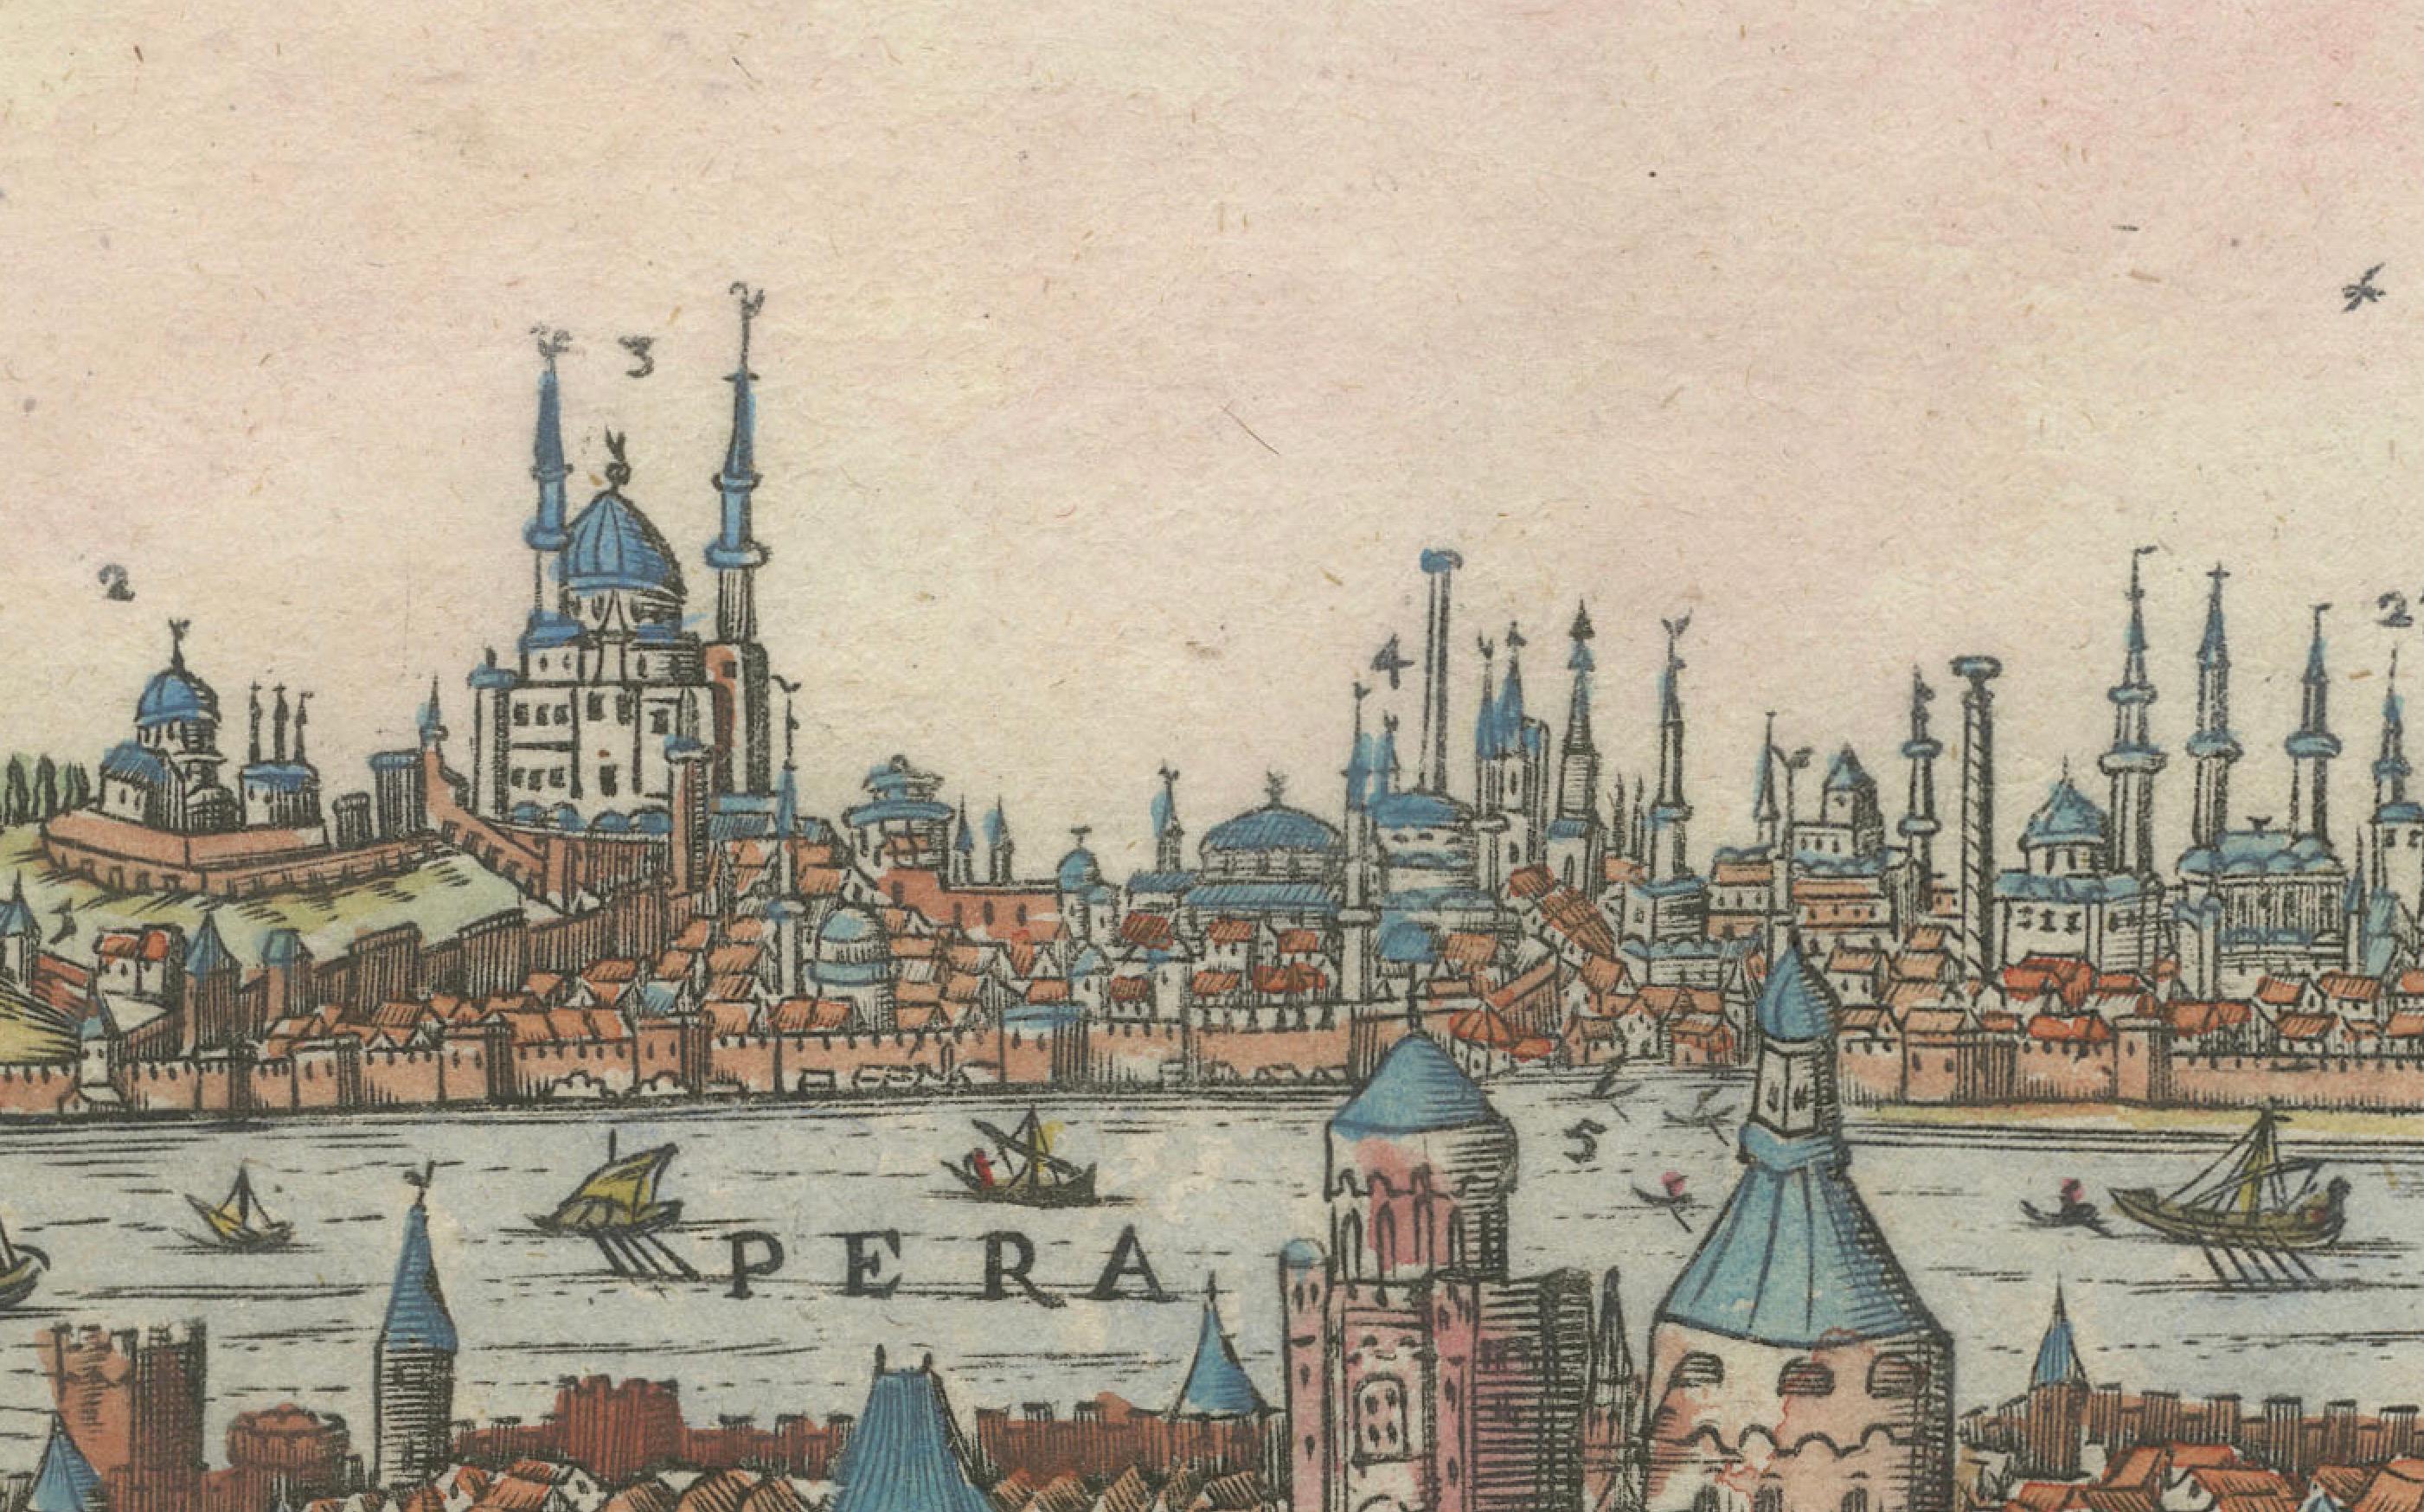 Constantinopel: A rare German copy of Matthaus Merian's view

Original Antique Engraved Map of Constantinopel. Old hand-coloured  Very rare and large bird's-eye view of Istanbul. The print bears many similarities to the also rare plates by Justus